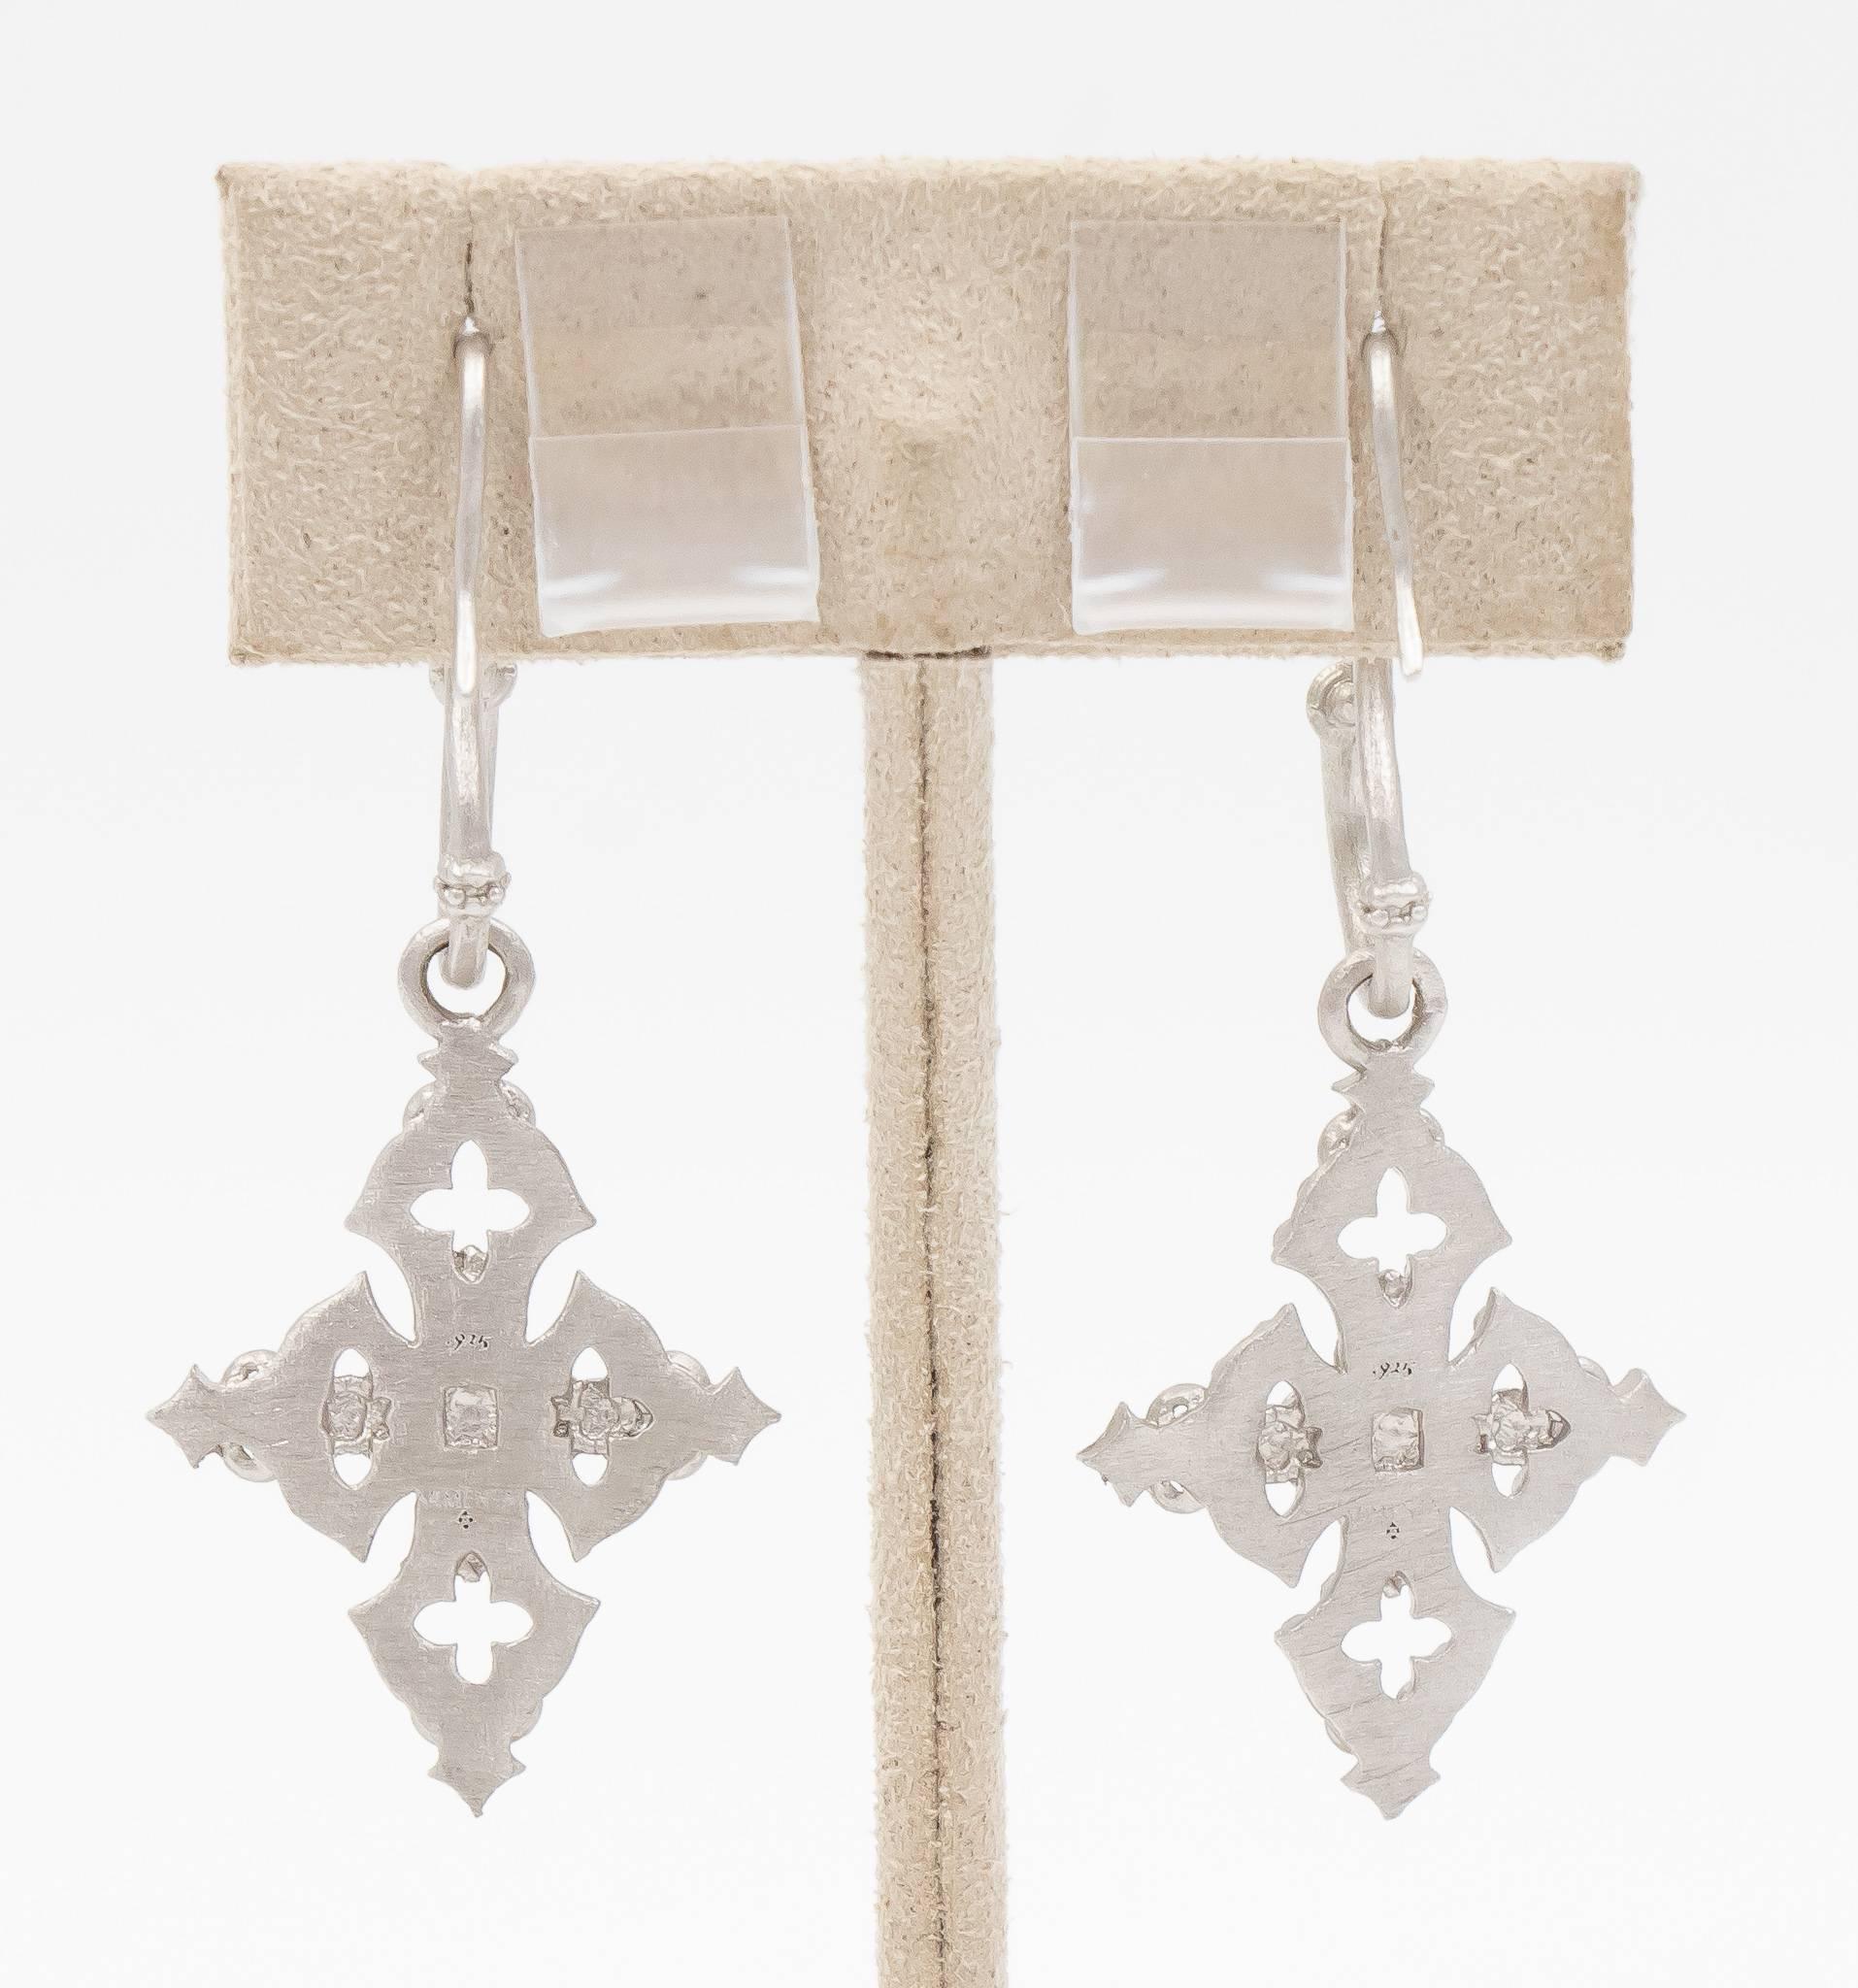 These Armenta New World drop earrings are dazzling with 0.22 carats of round brilliant diamonds set throughout the uniquely finished silver which gives this a signature look. The center diamond set in the cross is a fine quality champagne diamond. 